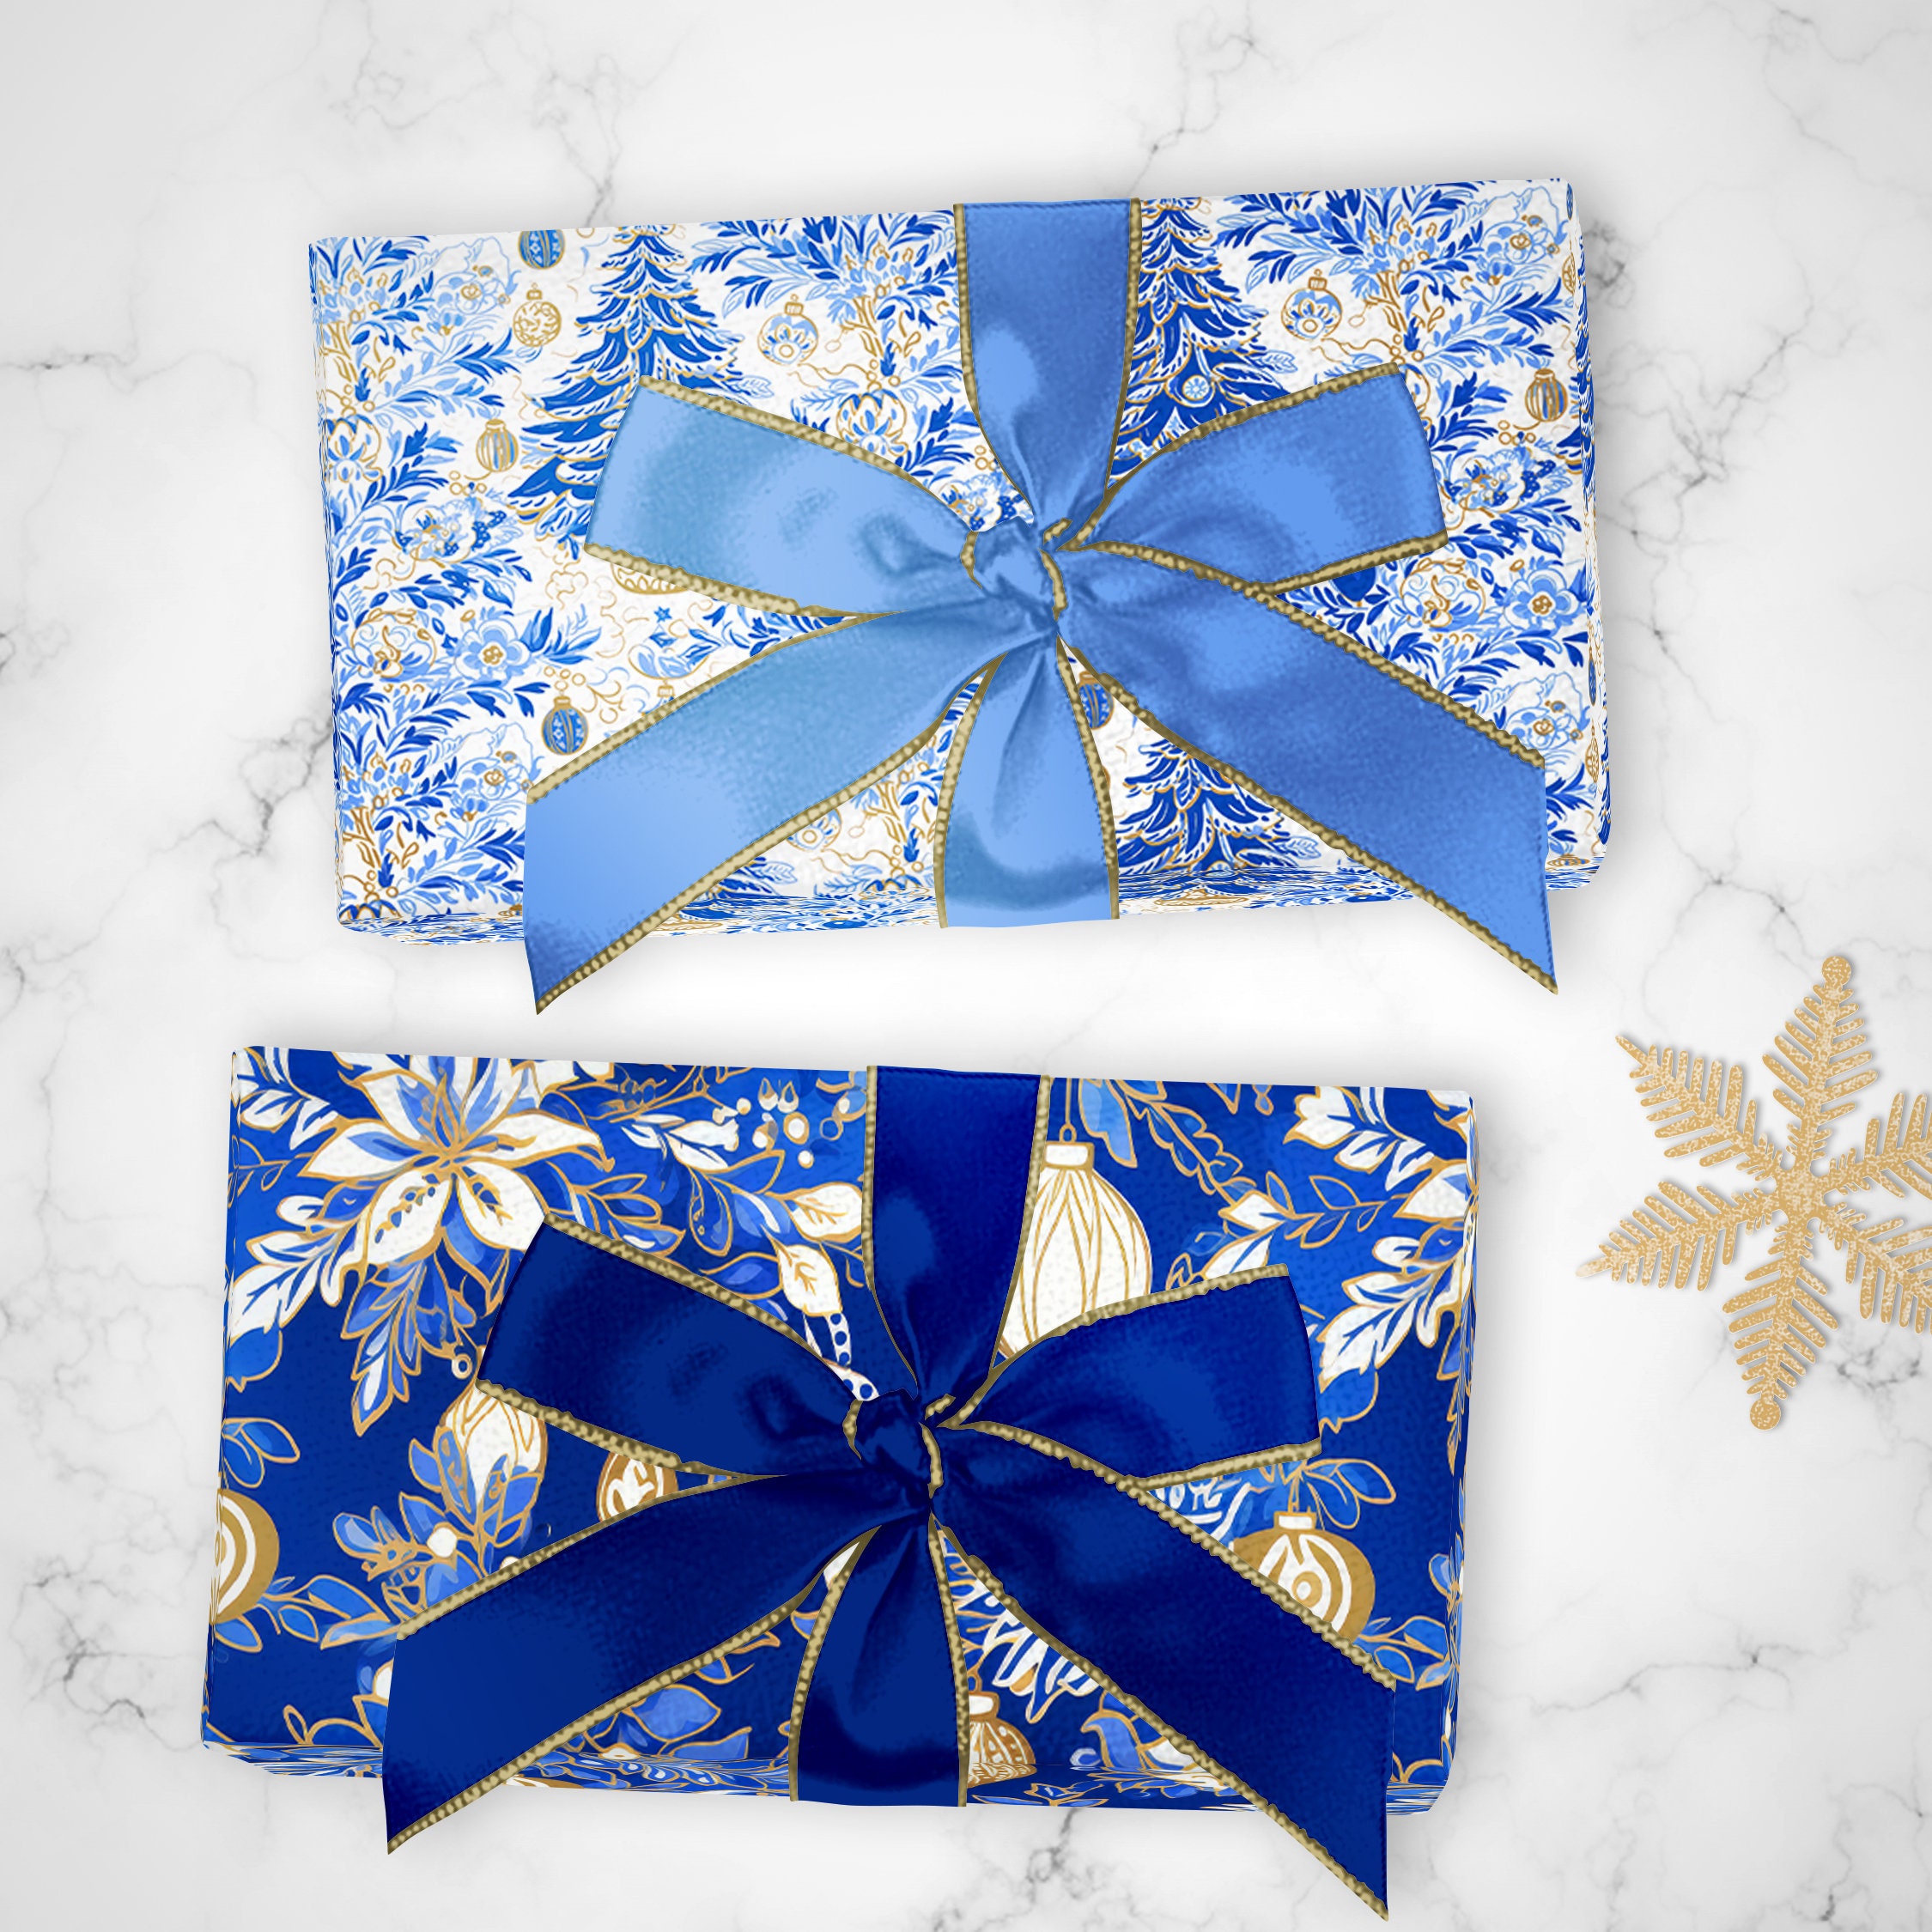 Preppy Christmas Wrapping Paper: Blue, White and Gold Christmas Ornaments gift  Wrap, Birthday, Holiday, Christmas 